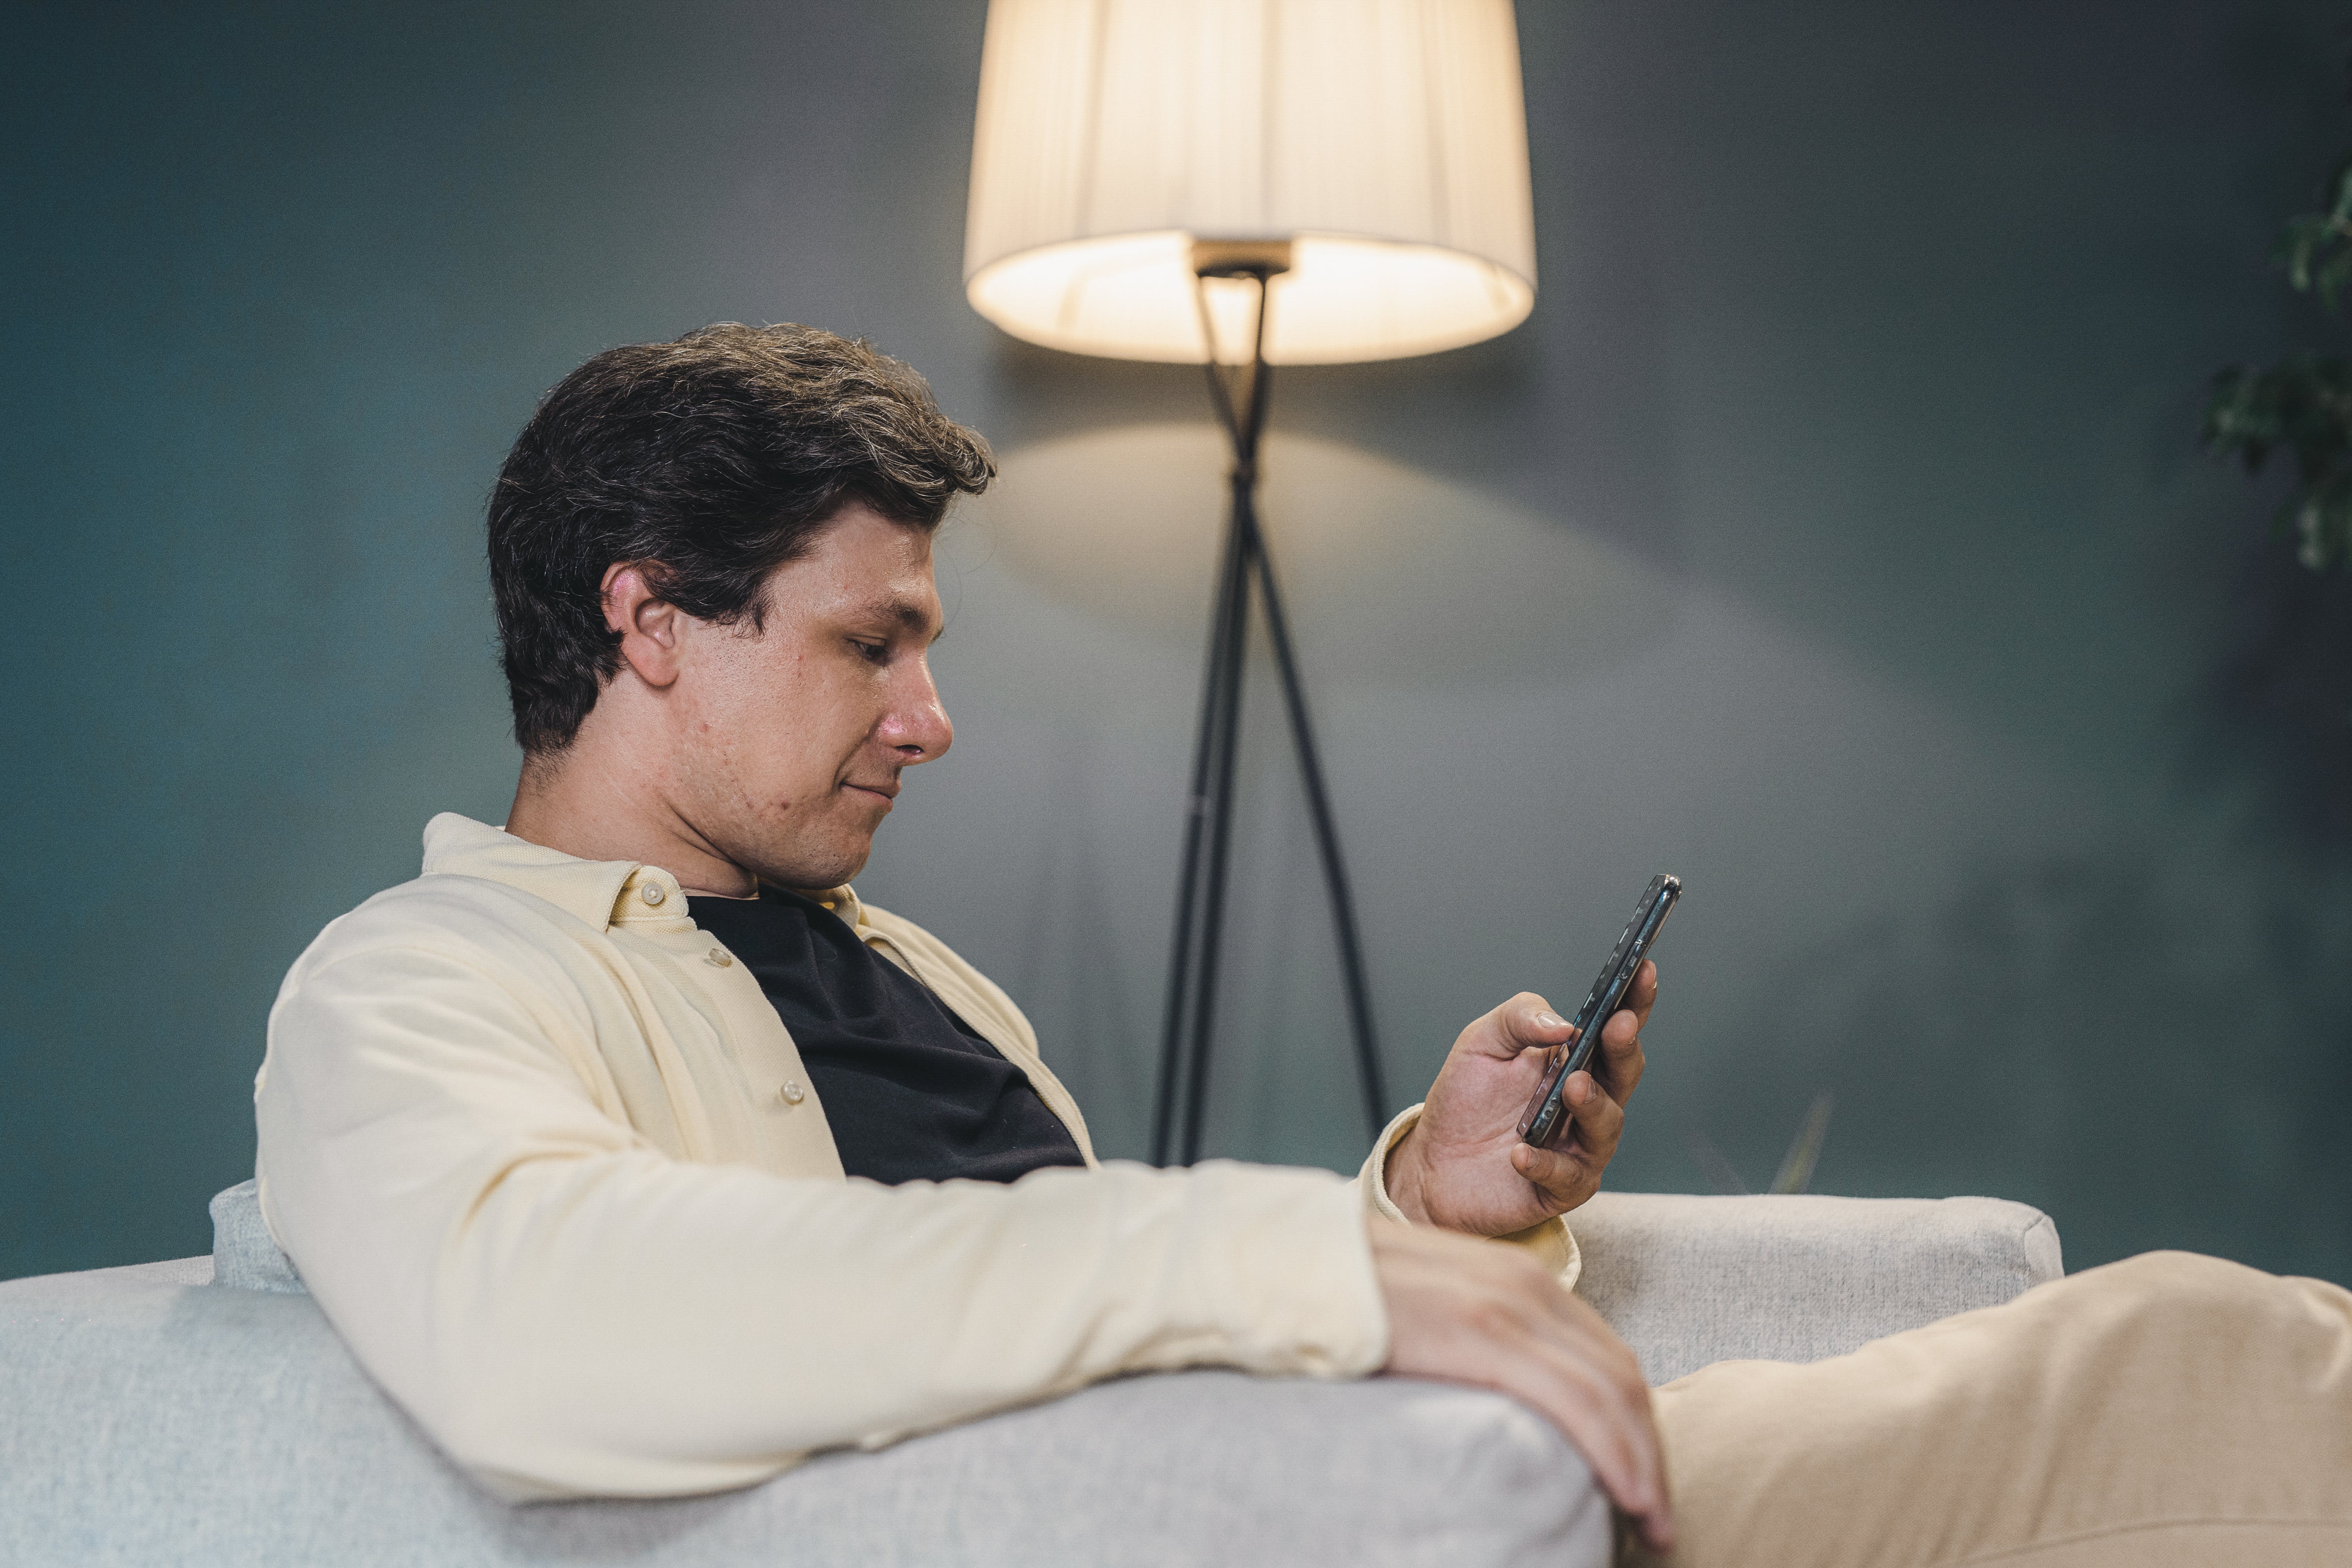 A man sitting on a sofa using a smartphone | Source: Pexels